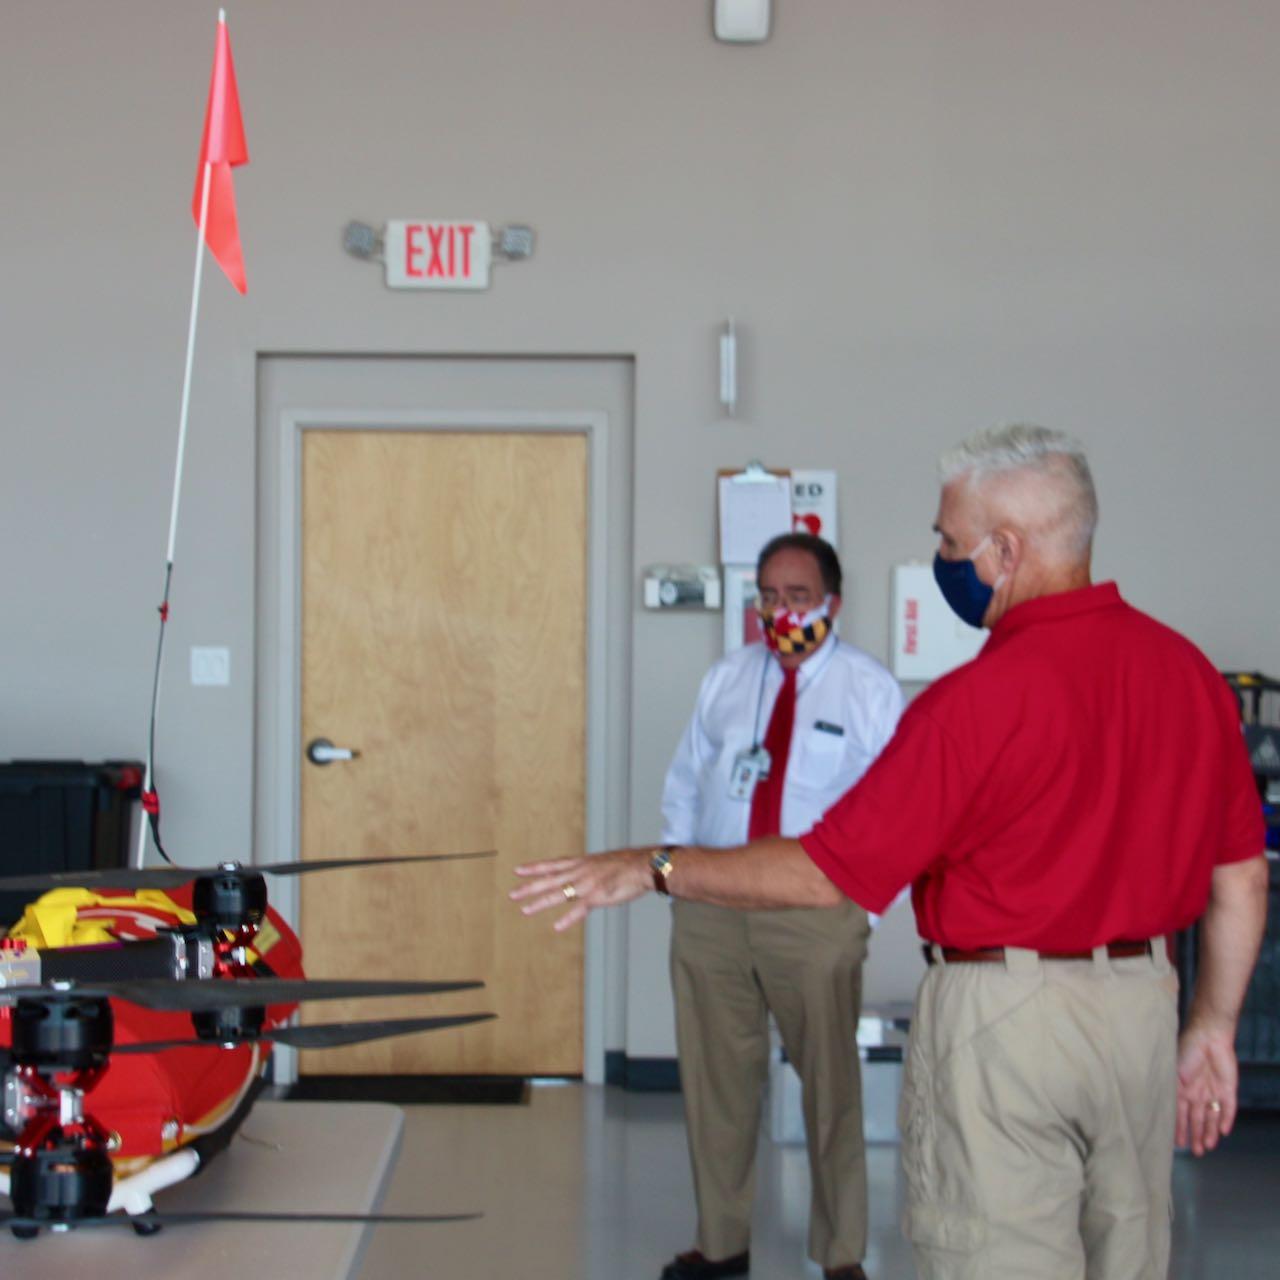 Chancellor Jay Perman speaks to Matt Scassero of the University of Maryland Unmanned Aircraft System (UAS) Test Site